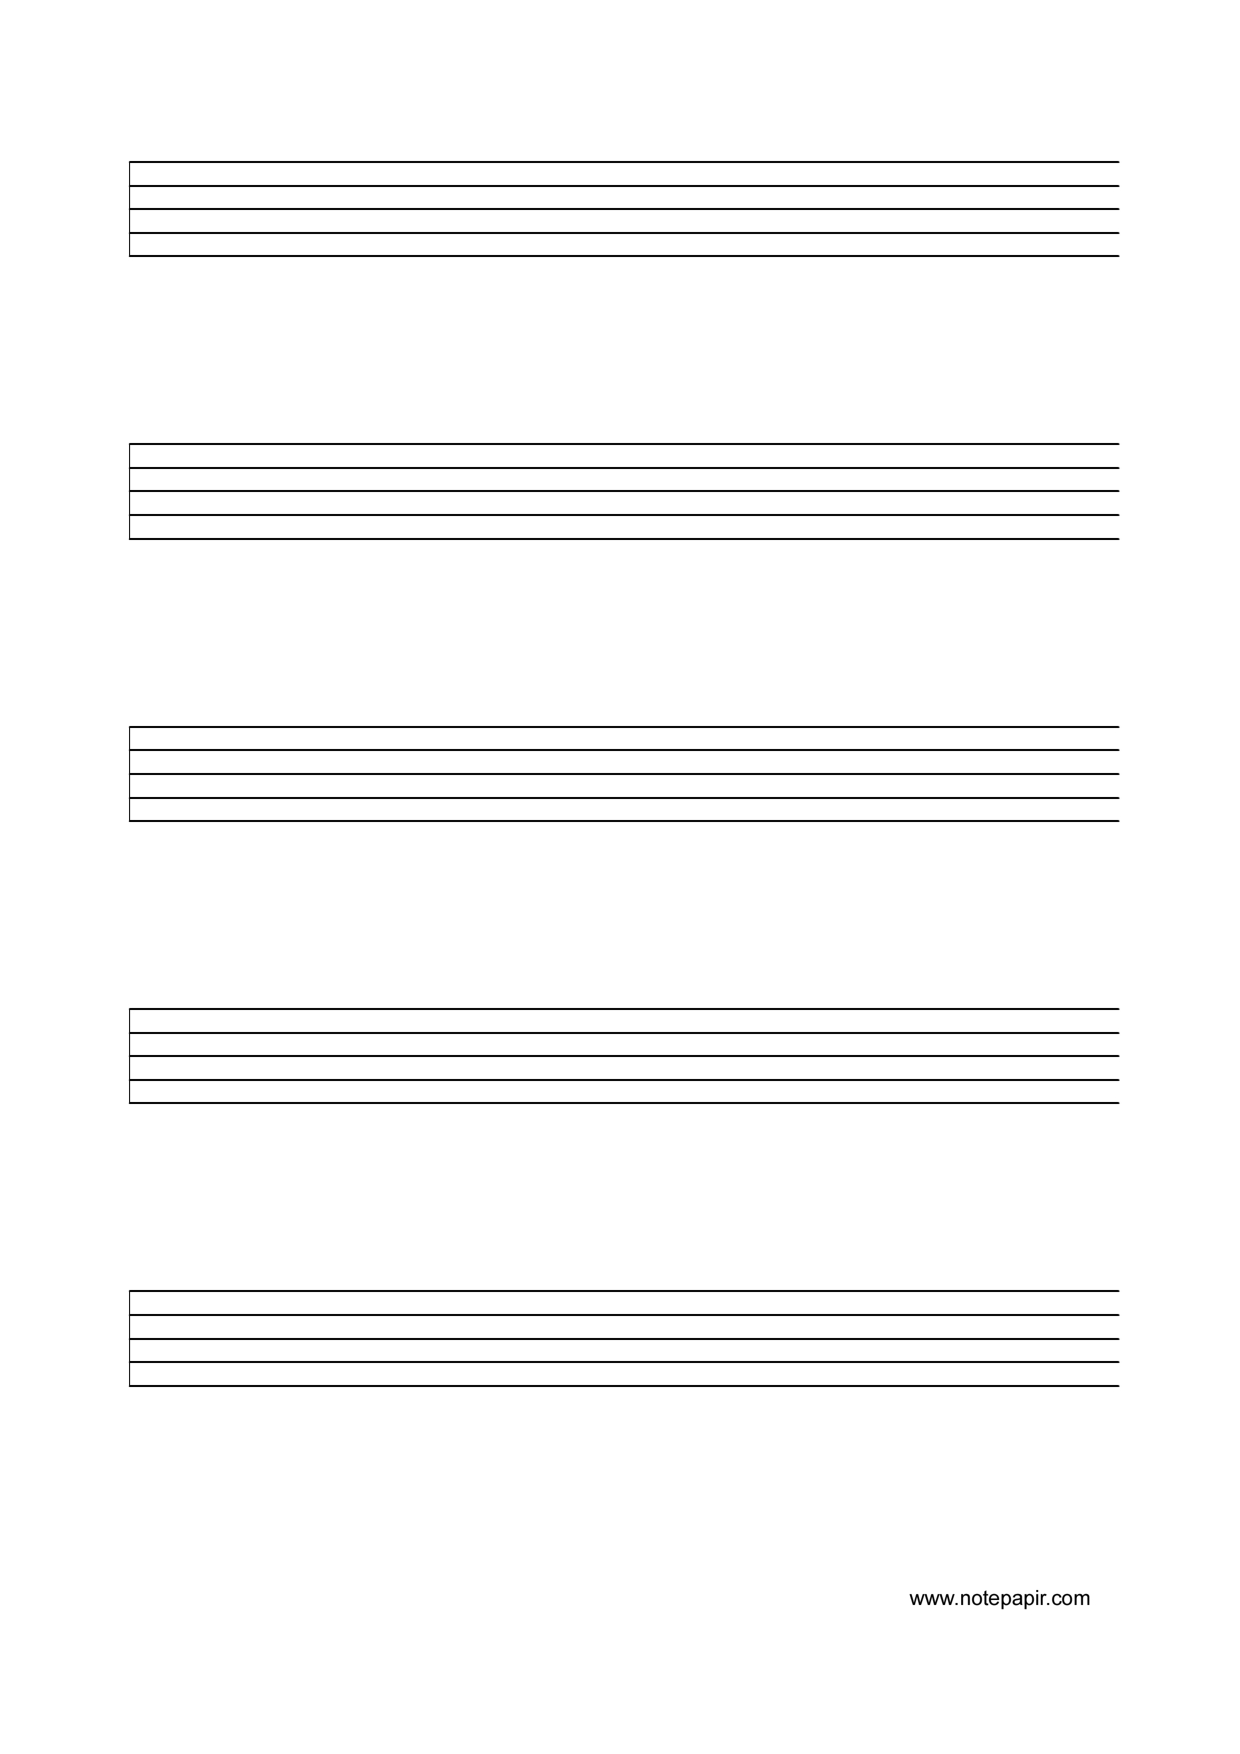 Music Staff Paper Template. Blank Treble Clef Staff Paper Free Sheet - Free Printable Blank Sheet Music